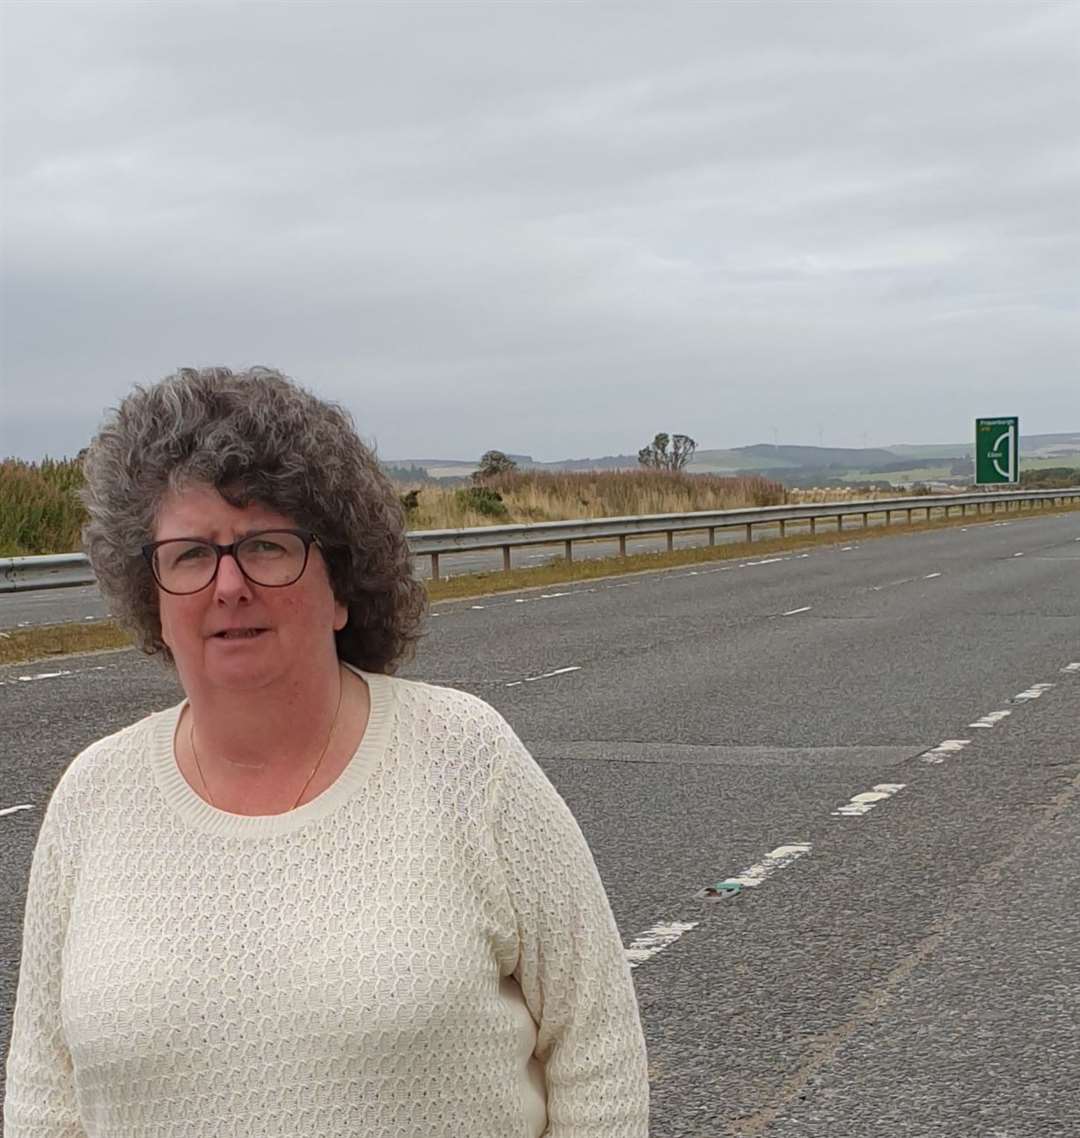 Councillor Owen has welcomed a planned start to remedial work on the A90.